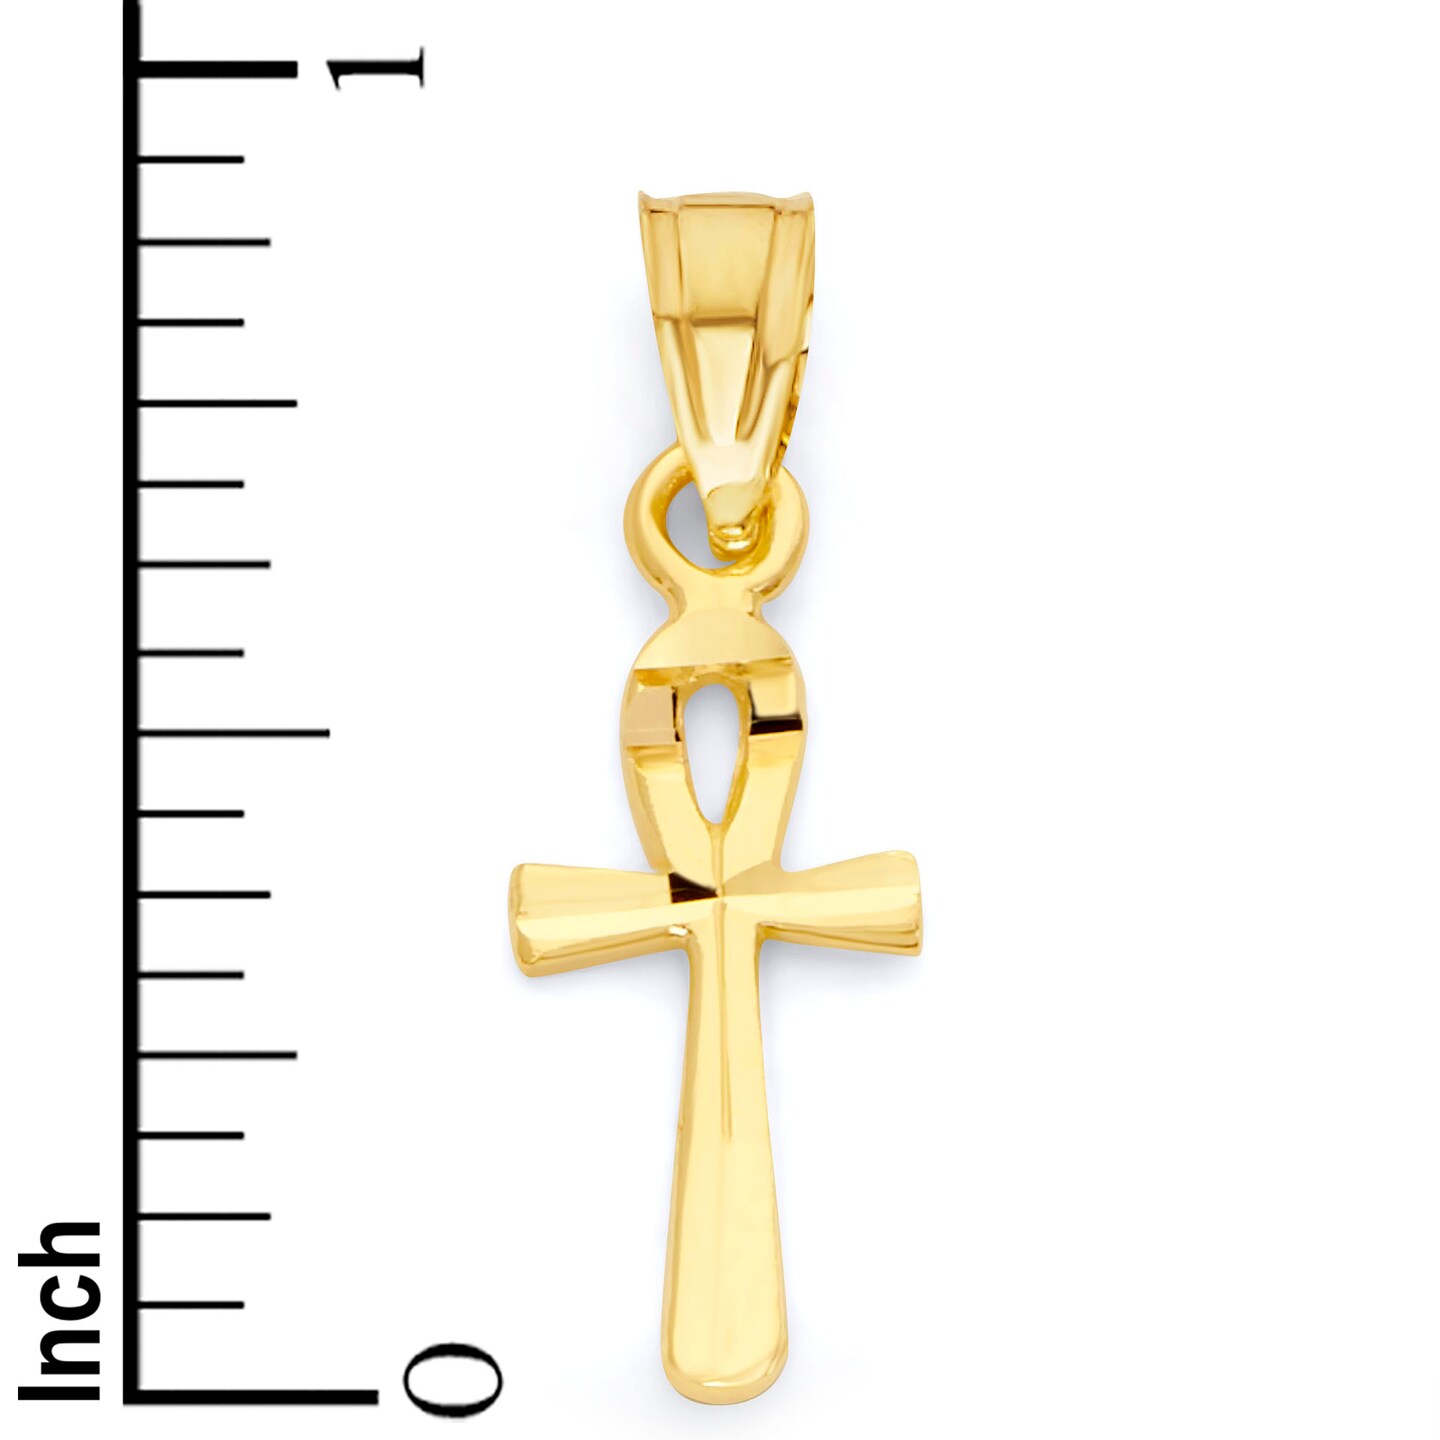 BEST SELLER Gold Ankh Necklace Women Charm Crystal Aunk Pendant Egyptian  Jewelry Gift for her